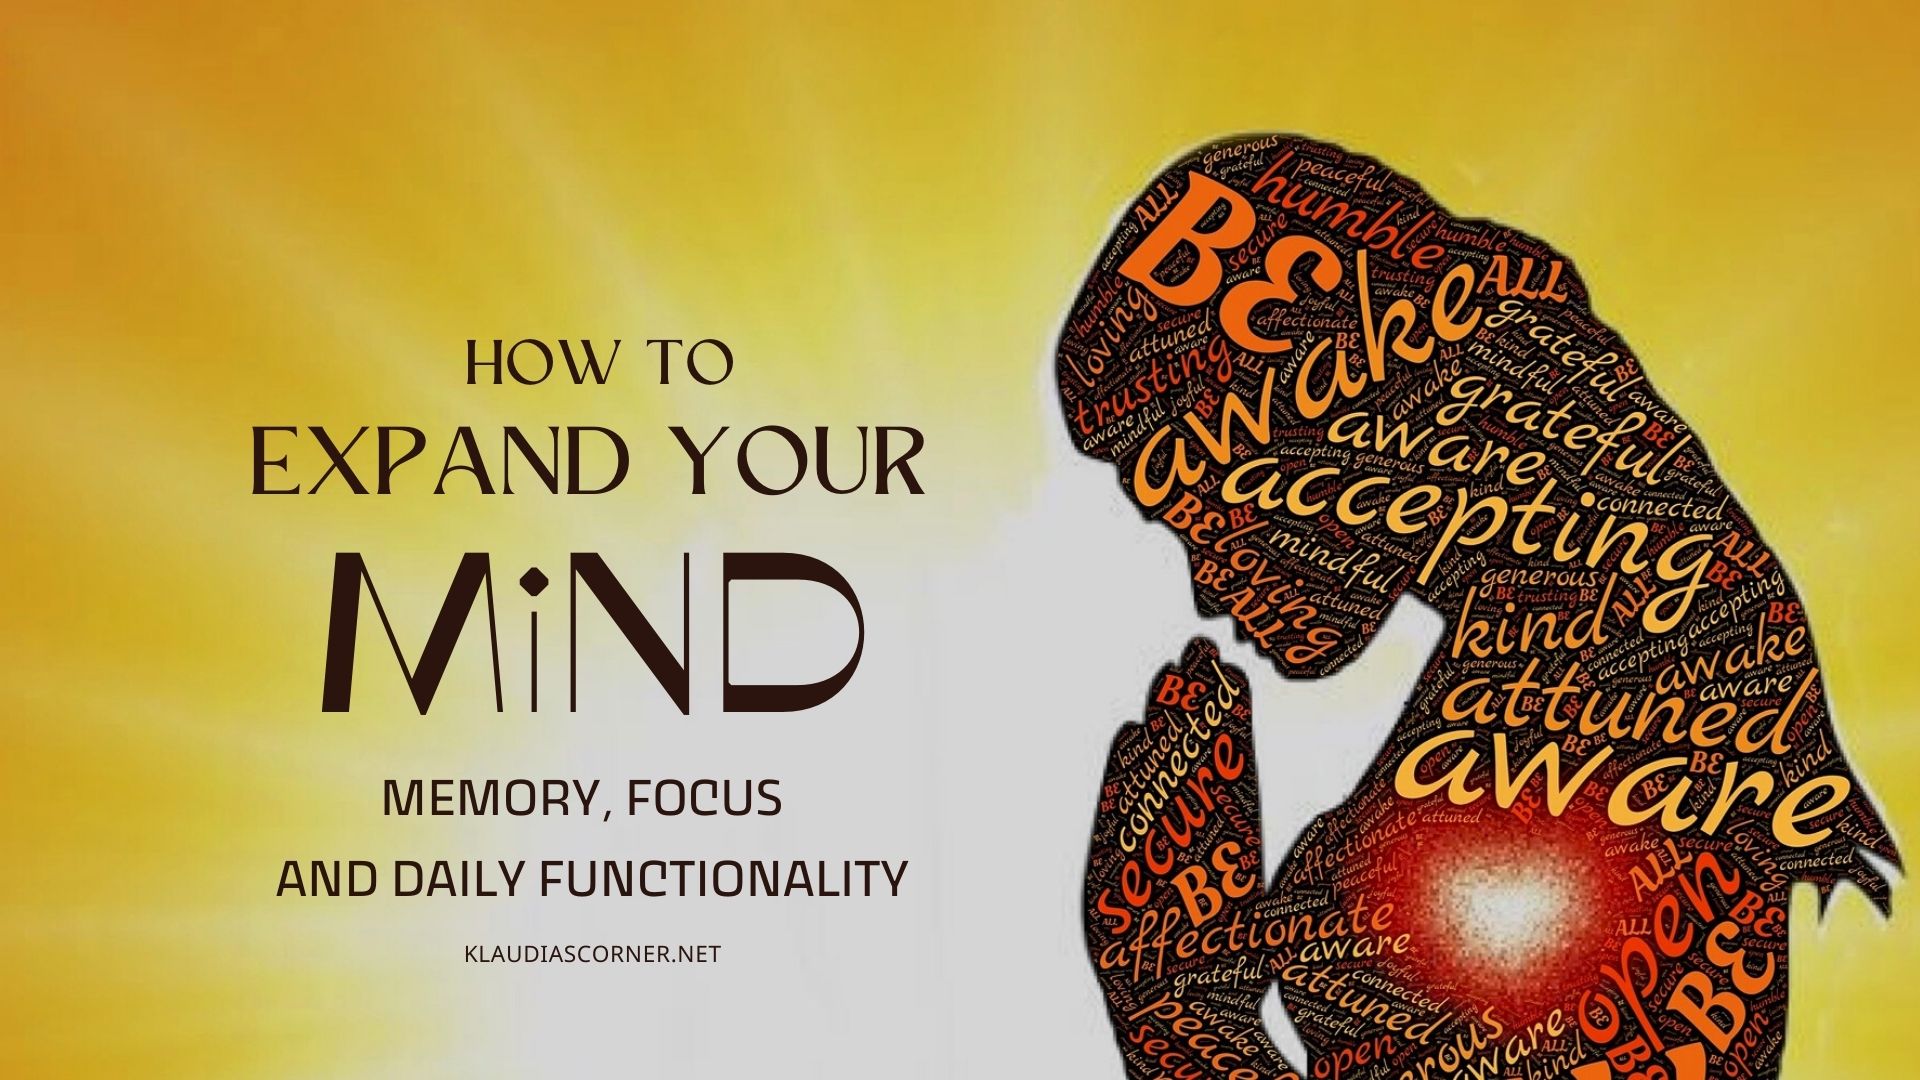 How To Expand Your Mind Memory Focus Daily Functionality